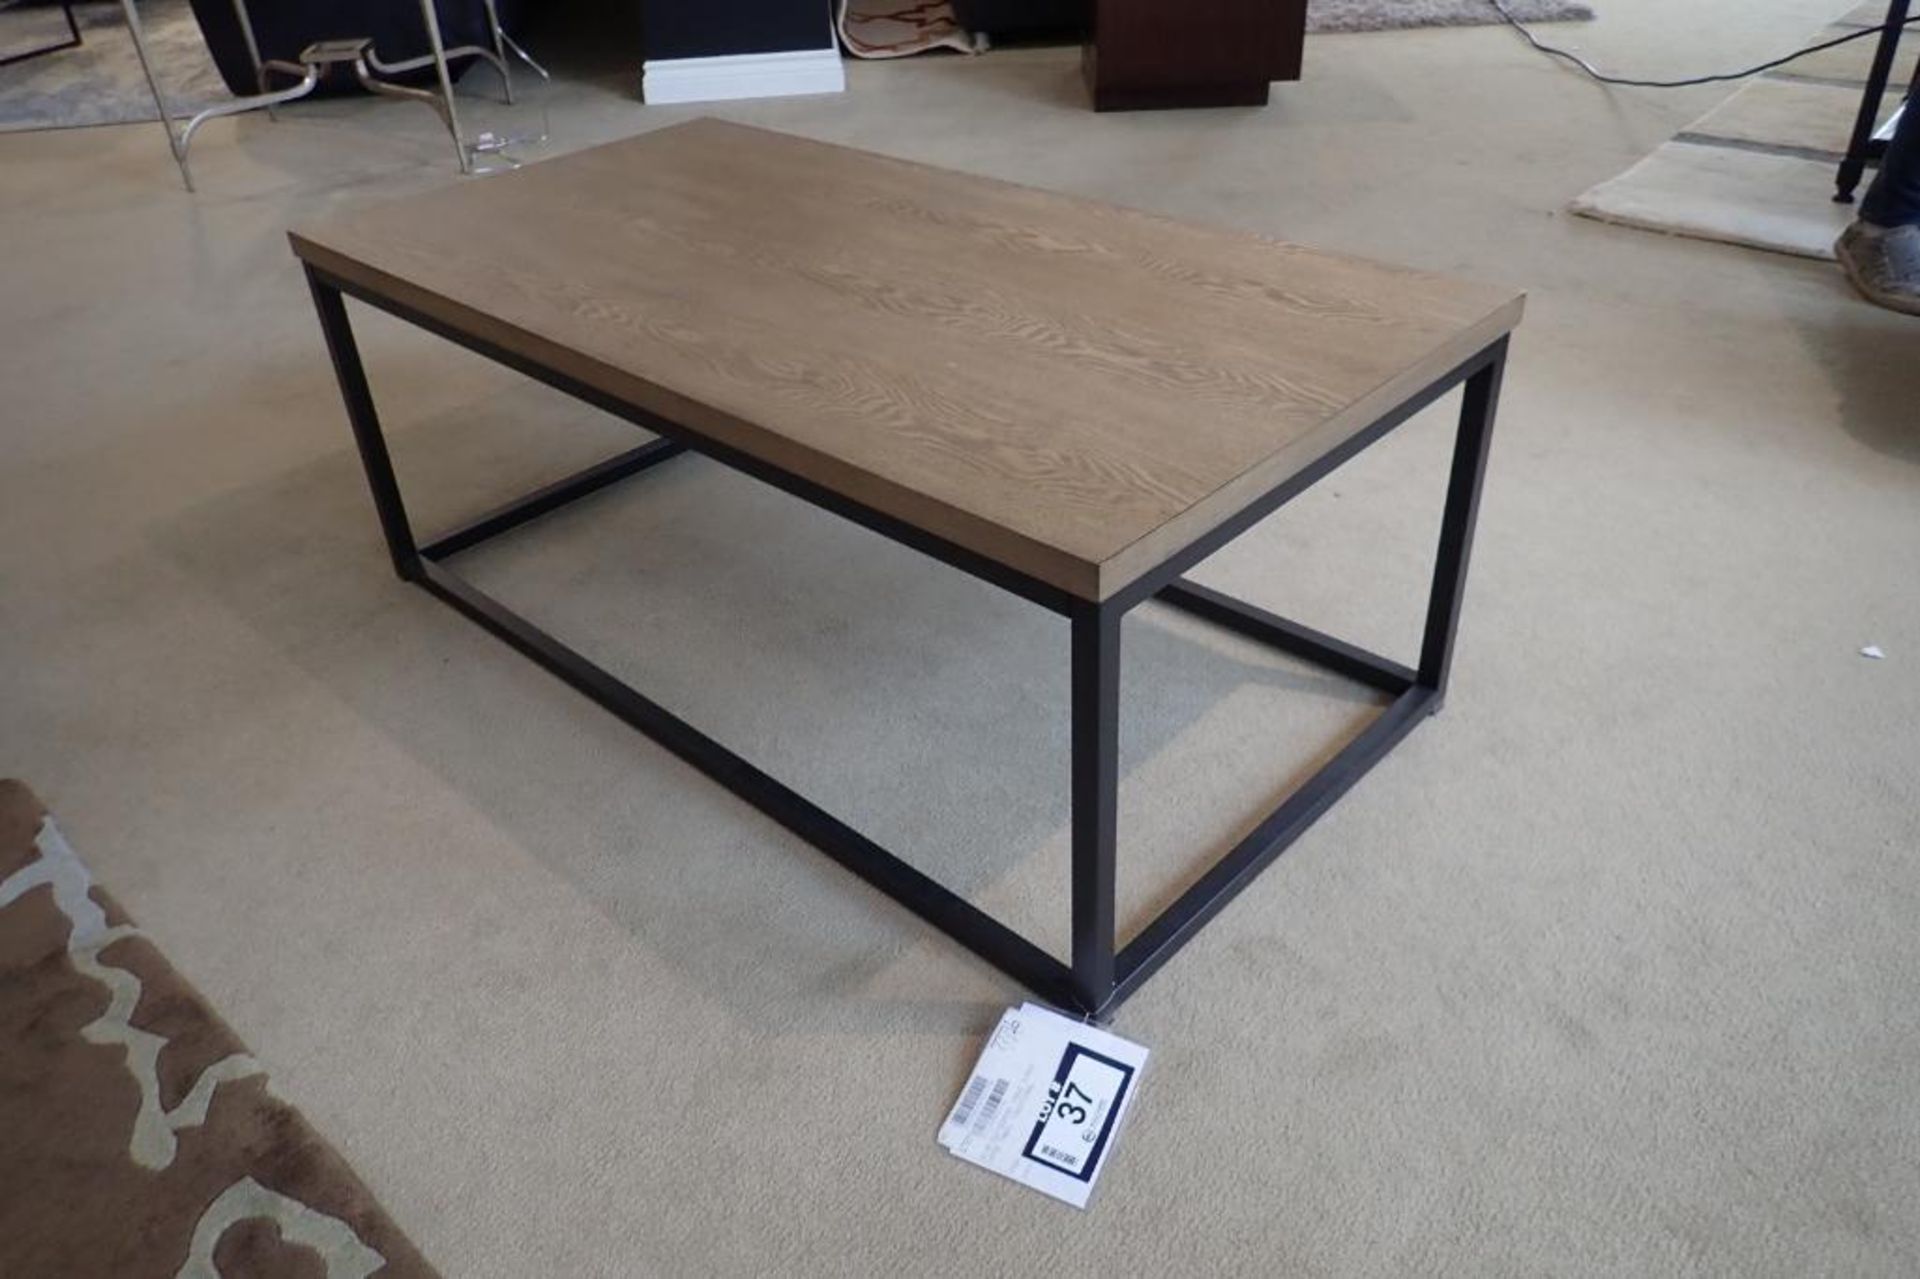 Lot of Decor-Rest 46"x24" Coffee Table, 24"x12" End Table and 24" Square End Table. - Image 2 of 4